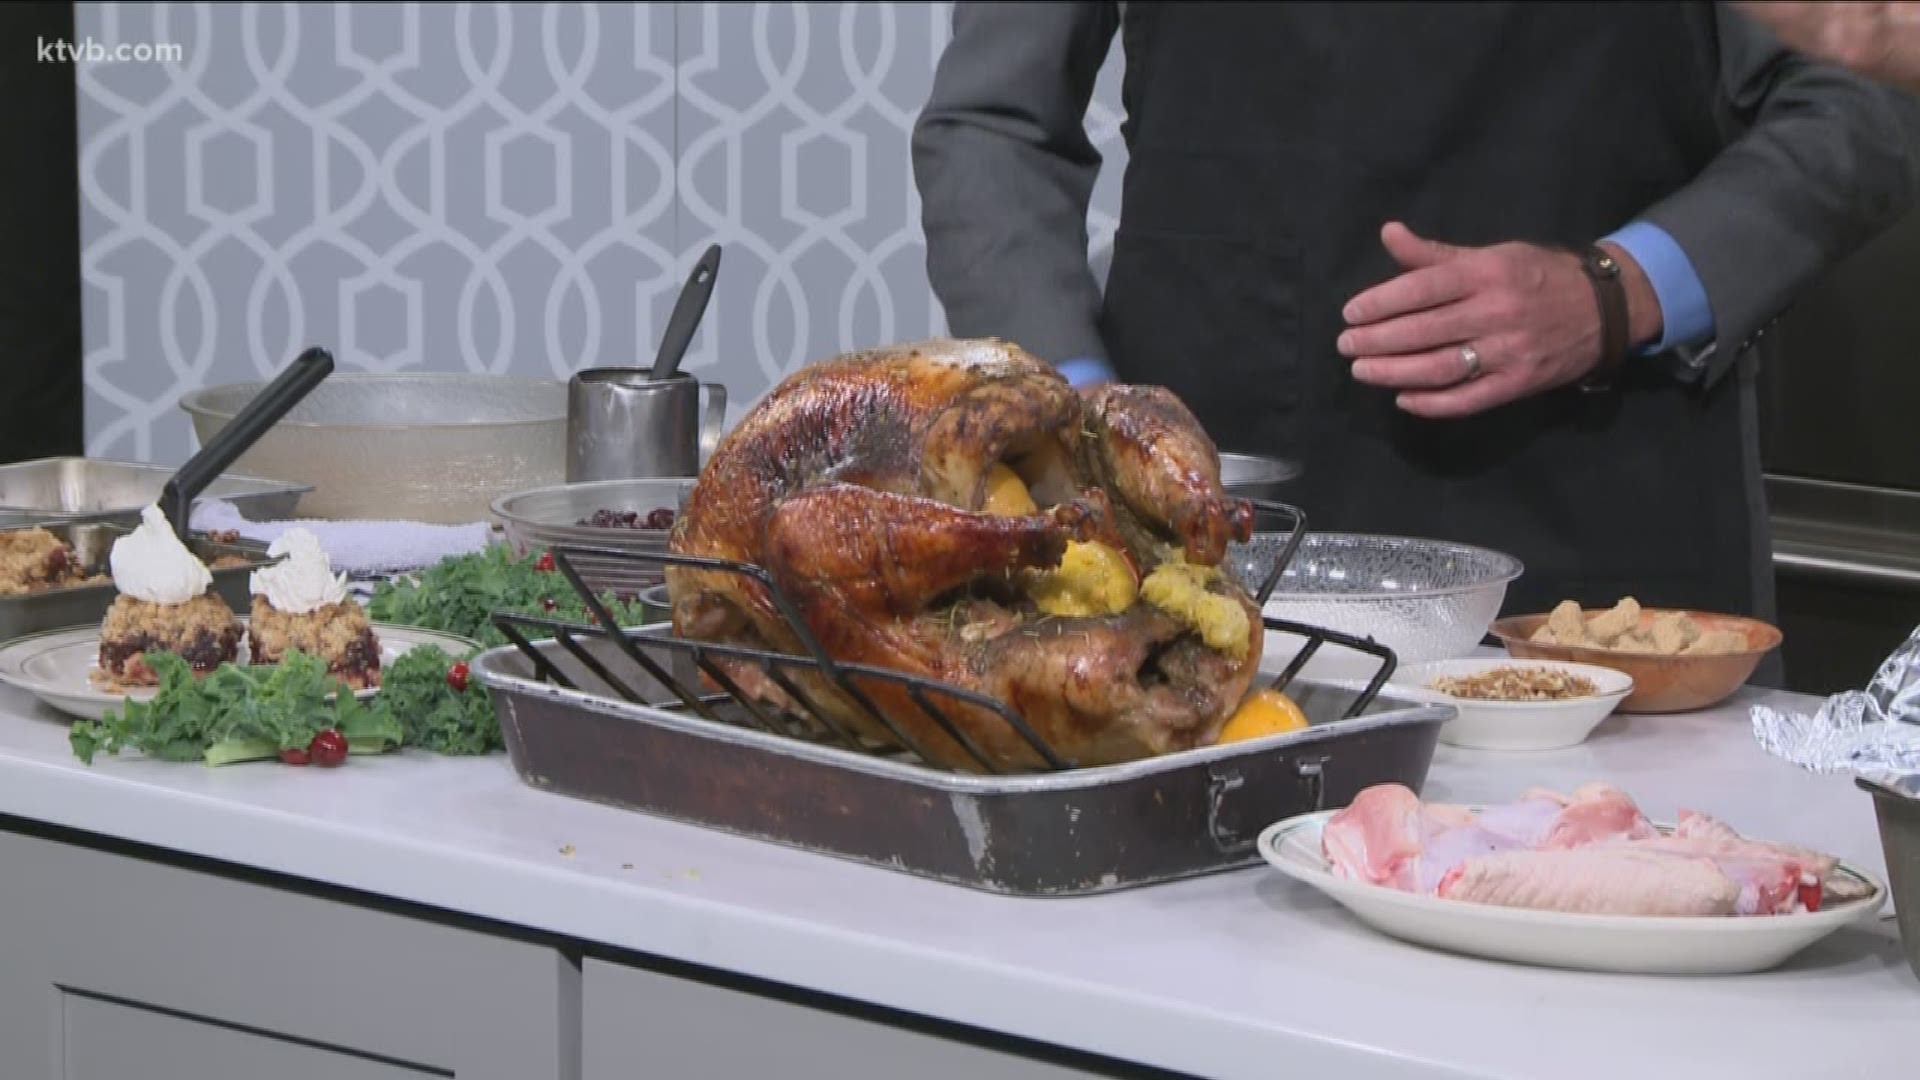 Chef Lou Aaron shows us how to prepare a delicious turkey and dessert.